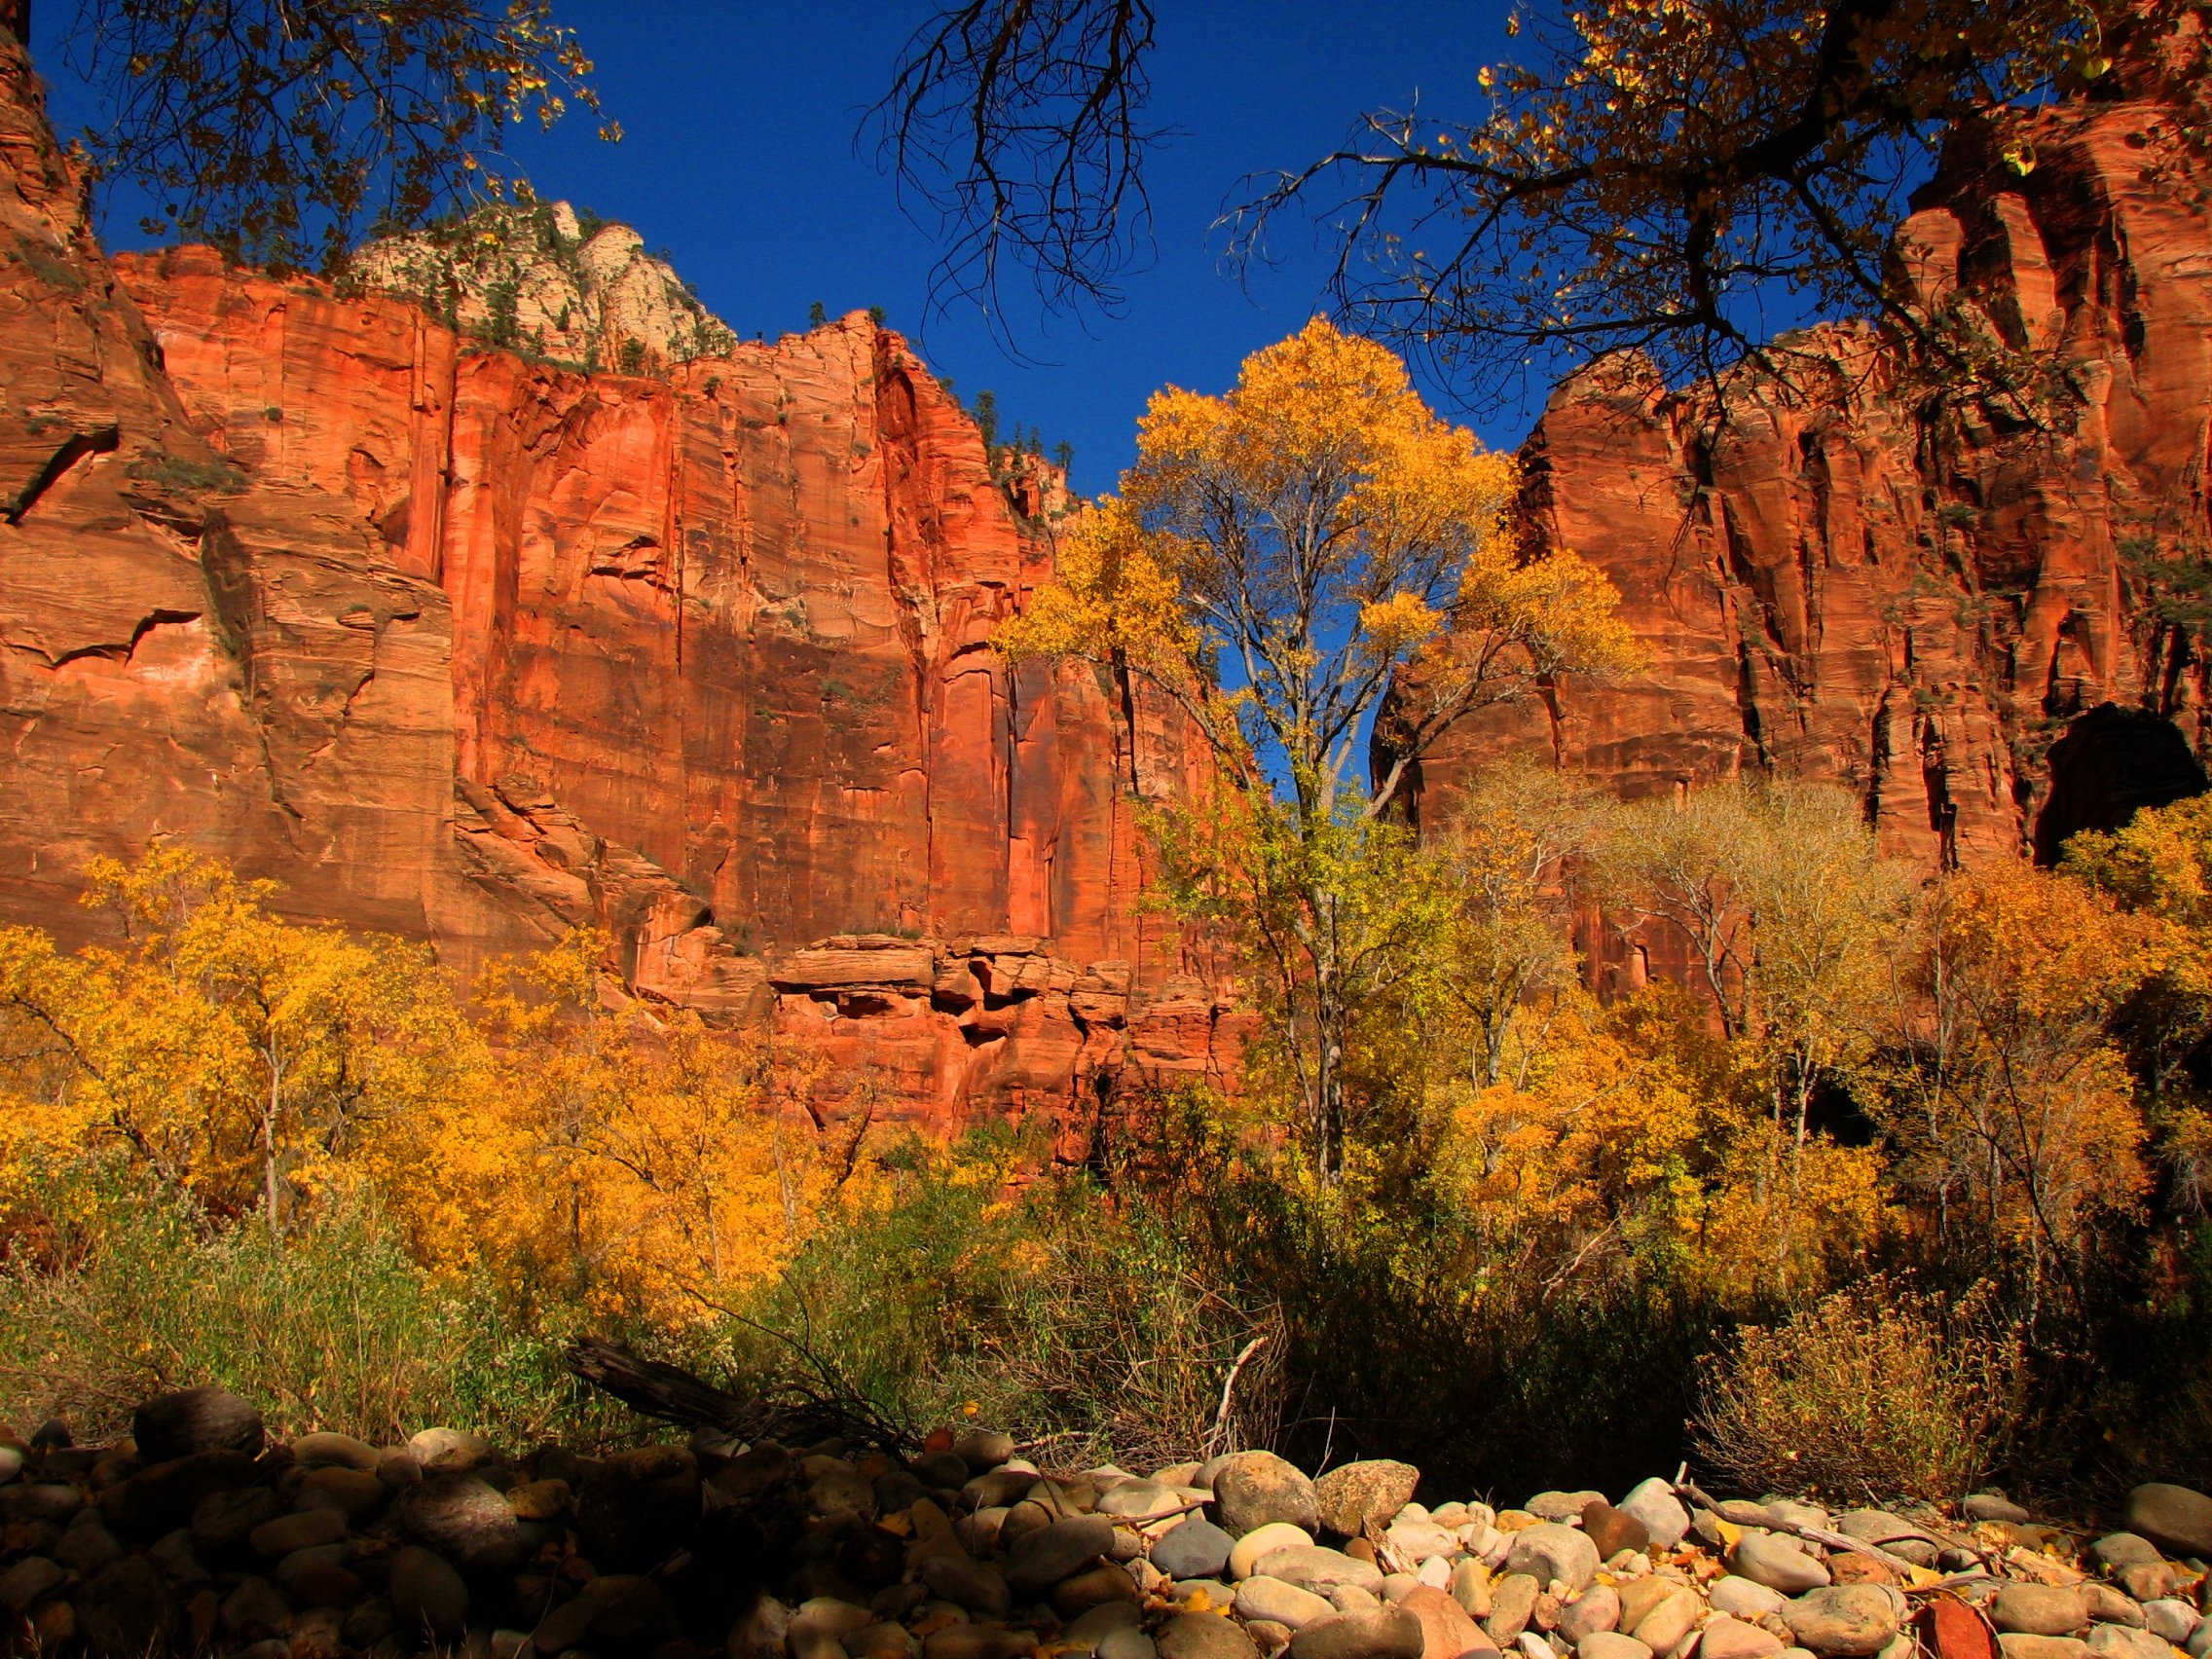 All sizes | Zion National Park | Flickr - Photo Sharing!